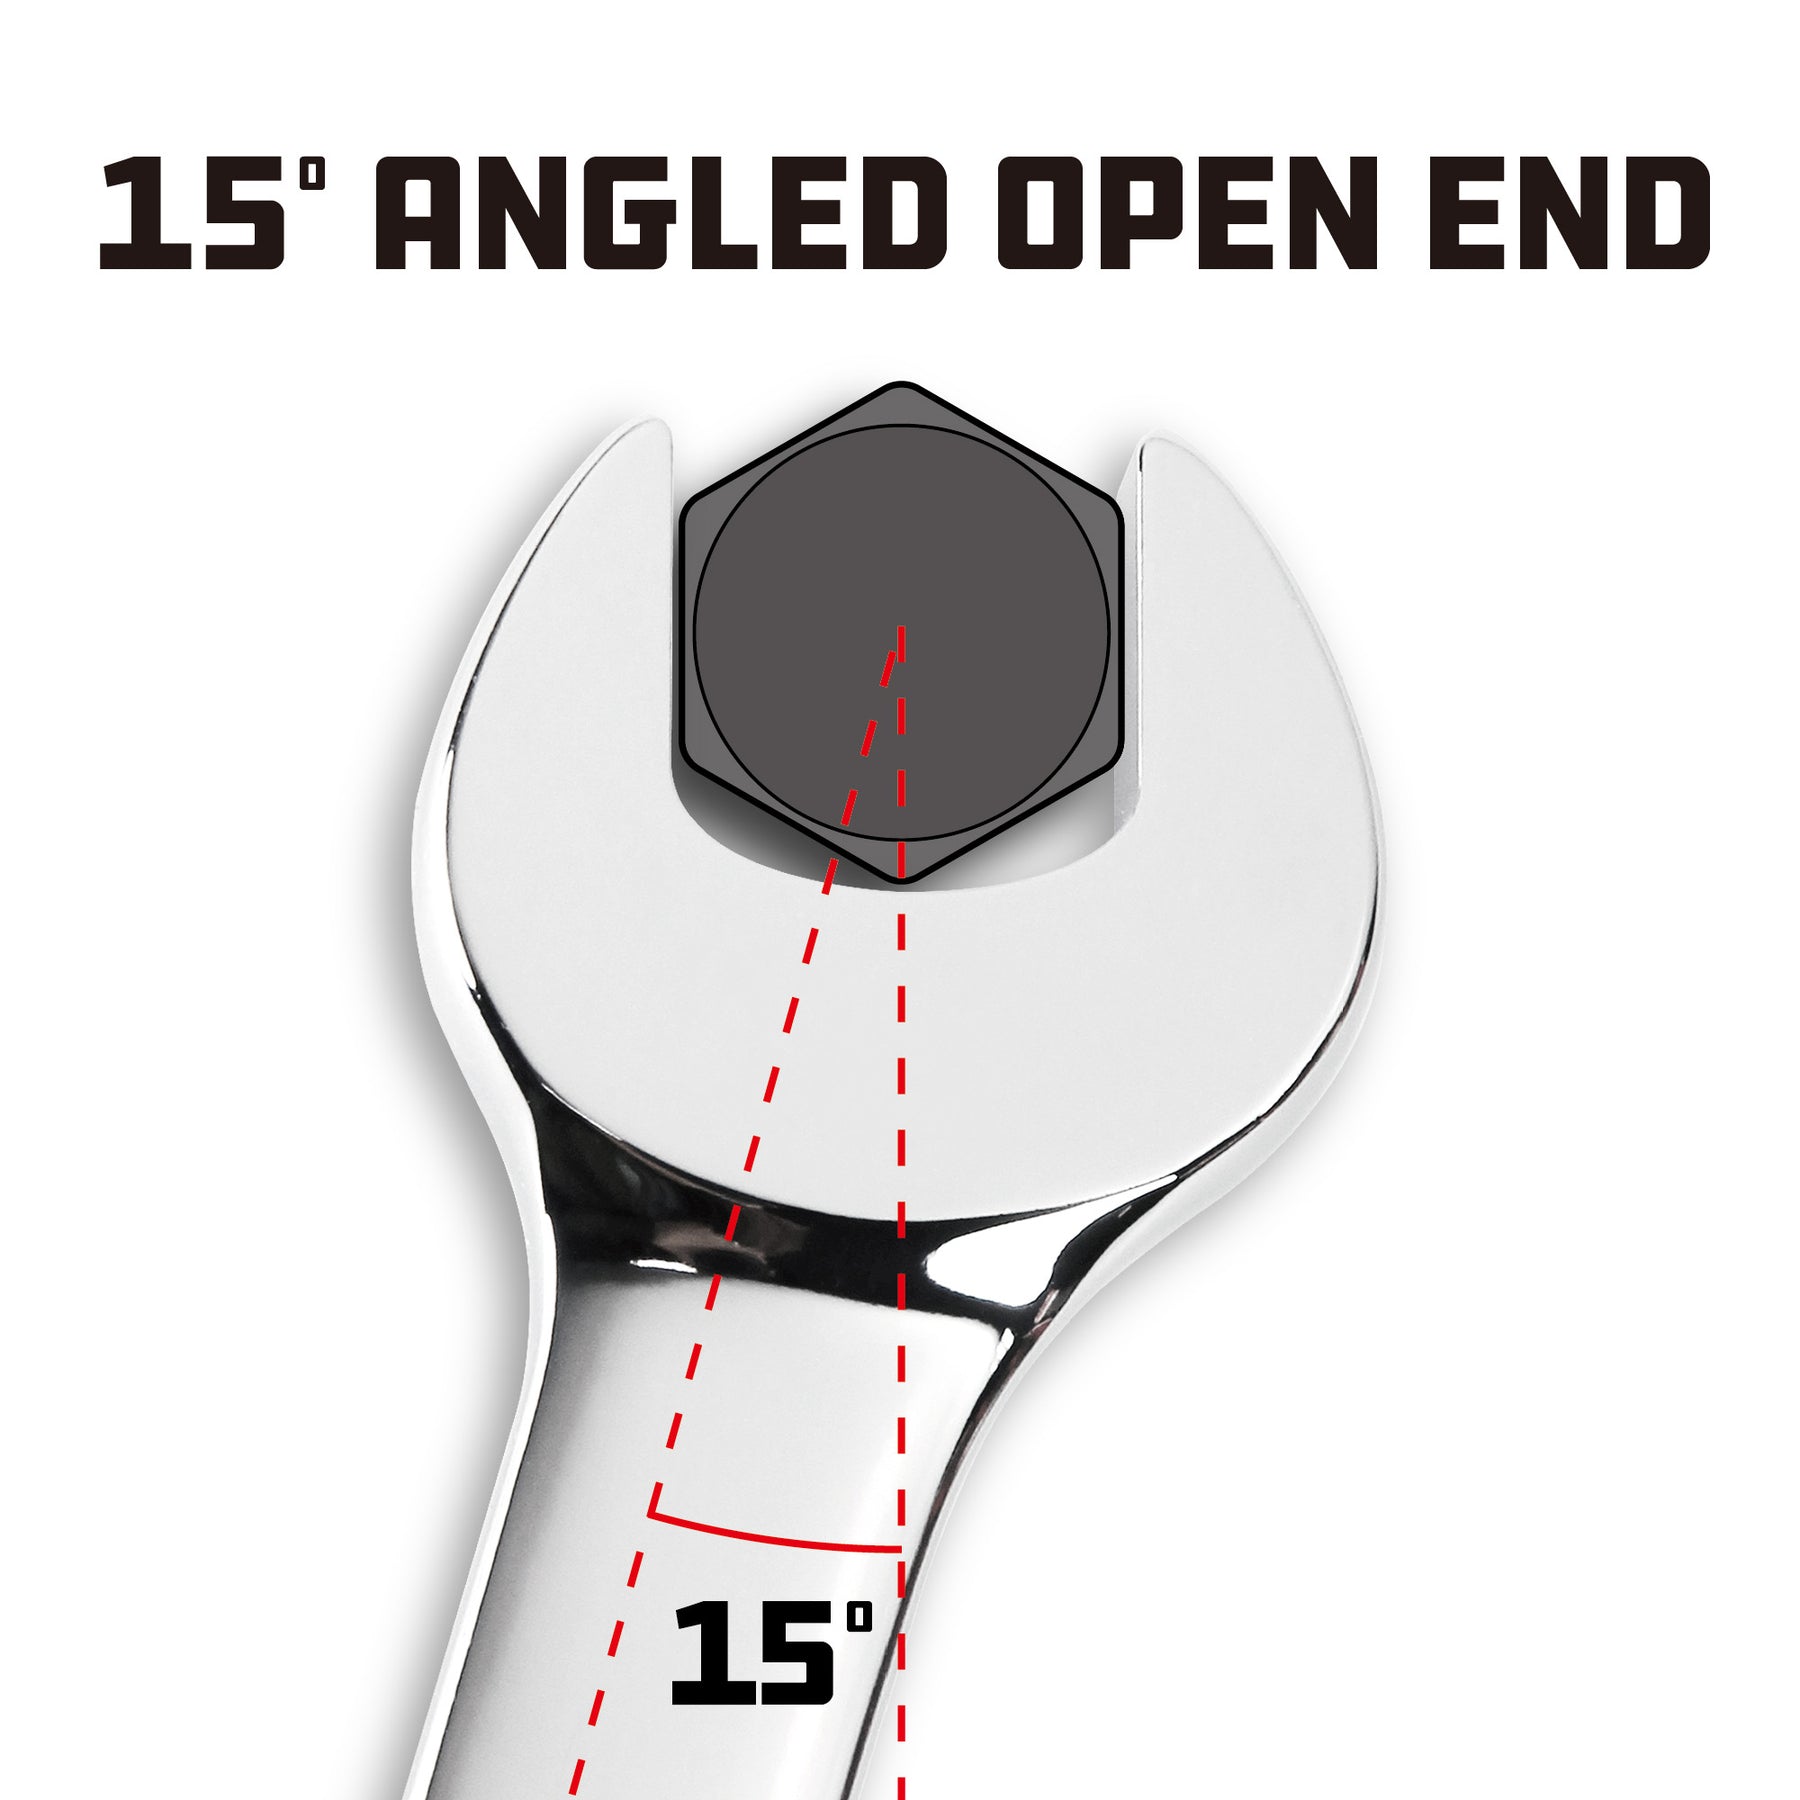 15/16 Inch Fully Polished SAE Combination Wrench